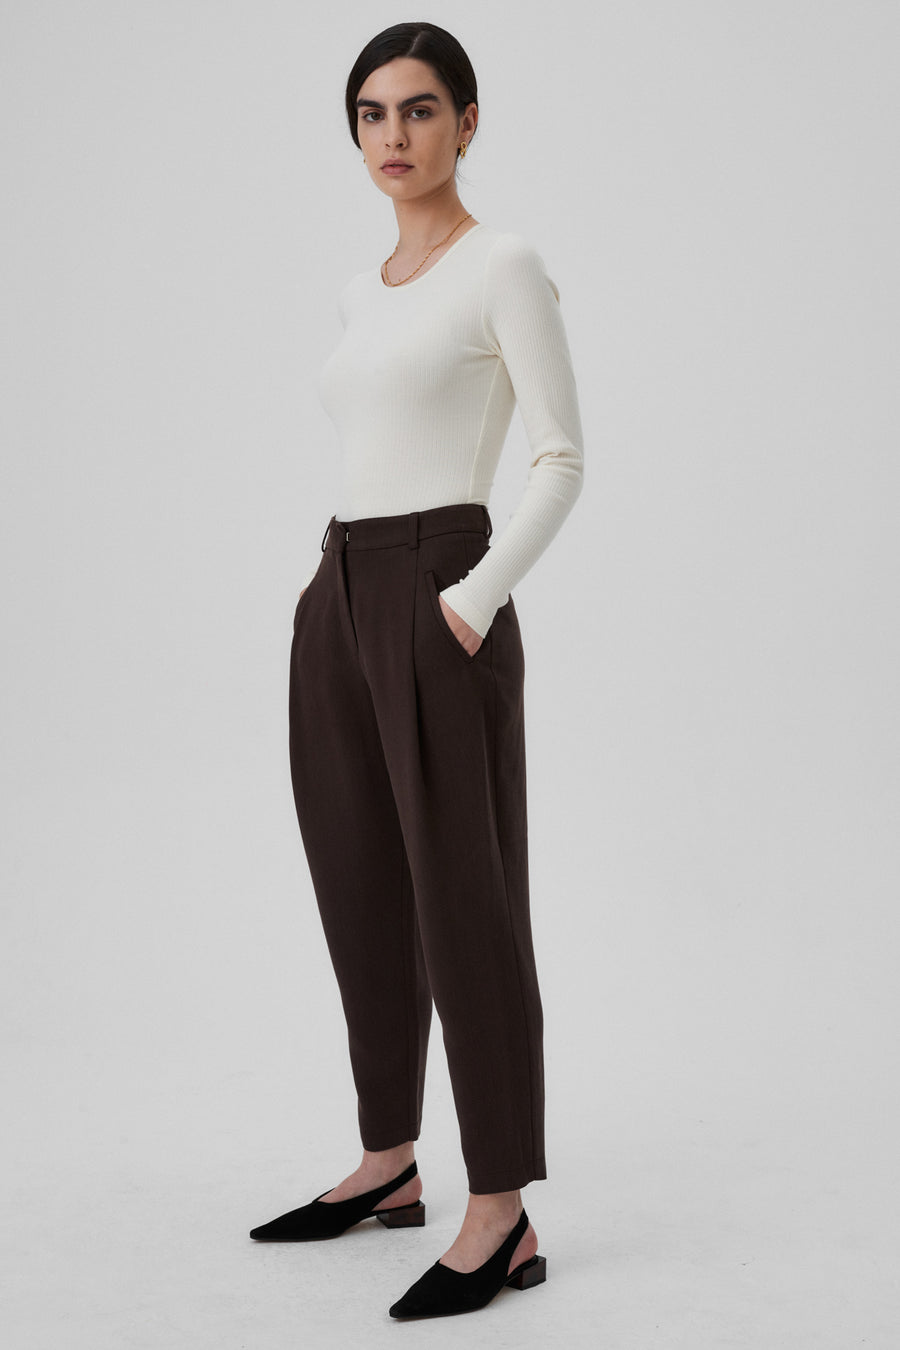 Tencel™ trousers / 05 / 04 / dark chocolate *bodysuit-in-organic-cotton-01-02-cream-white* ?The model is 172cm tall and wears size XS? |